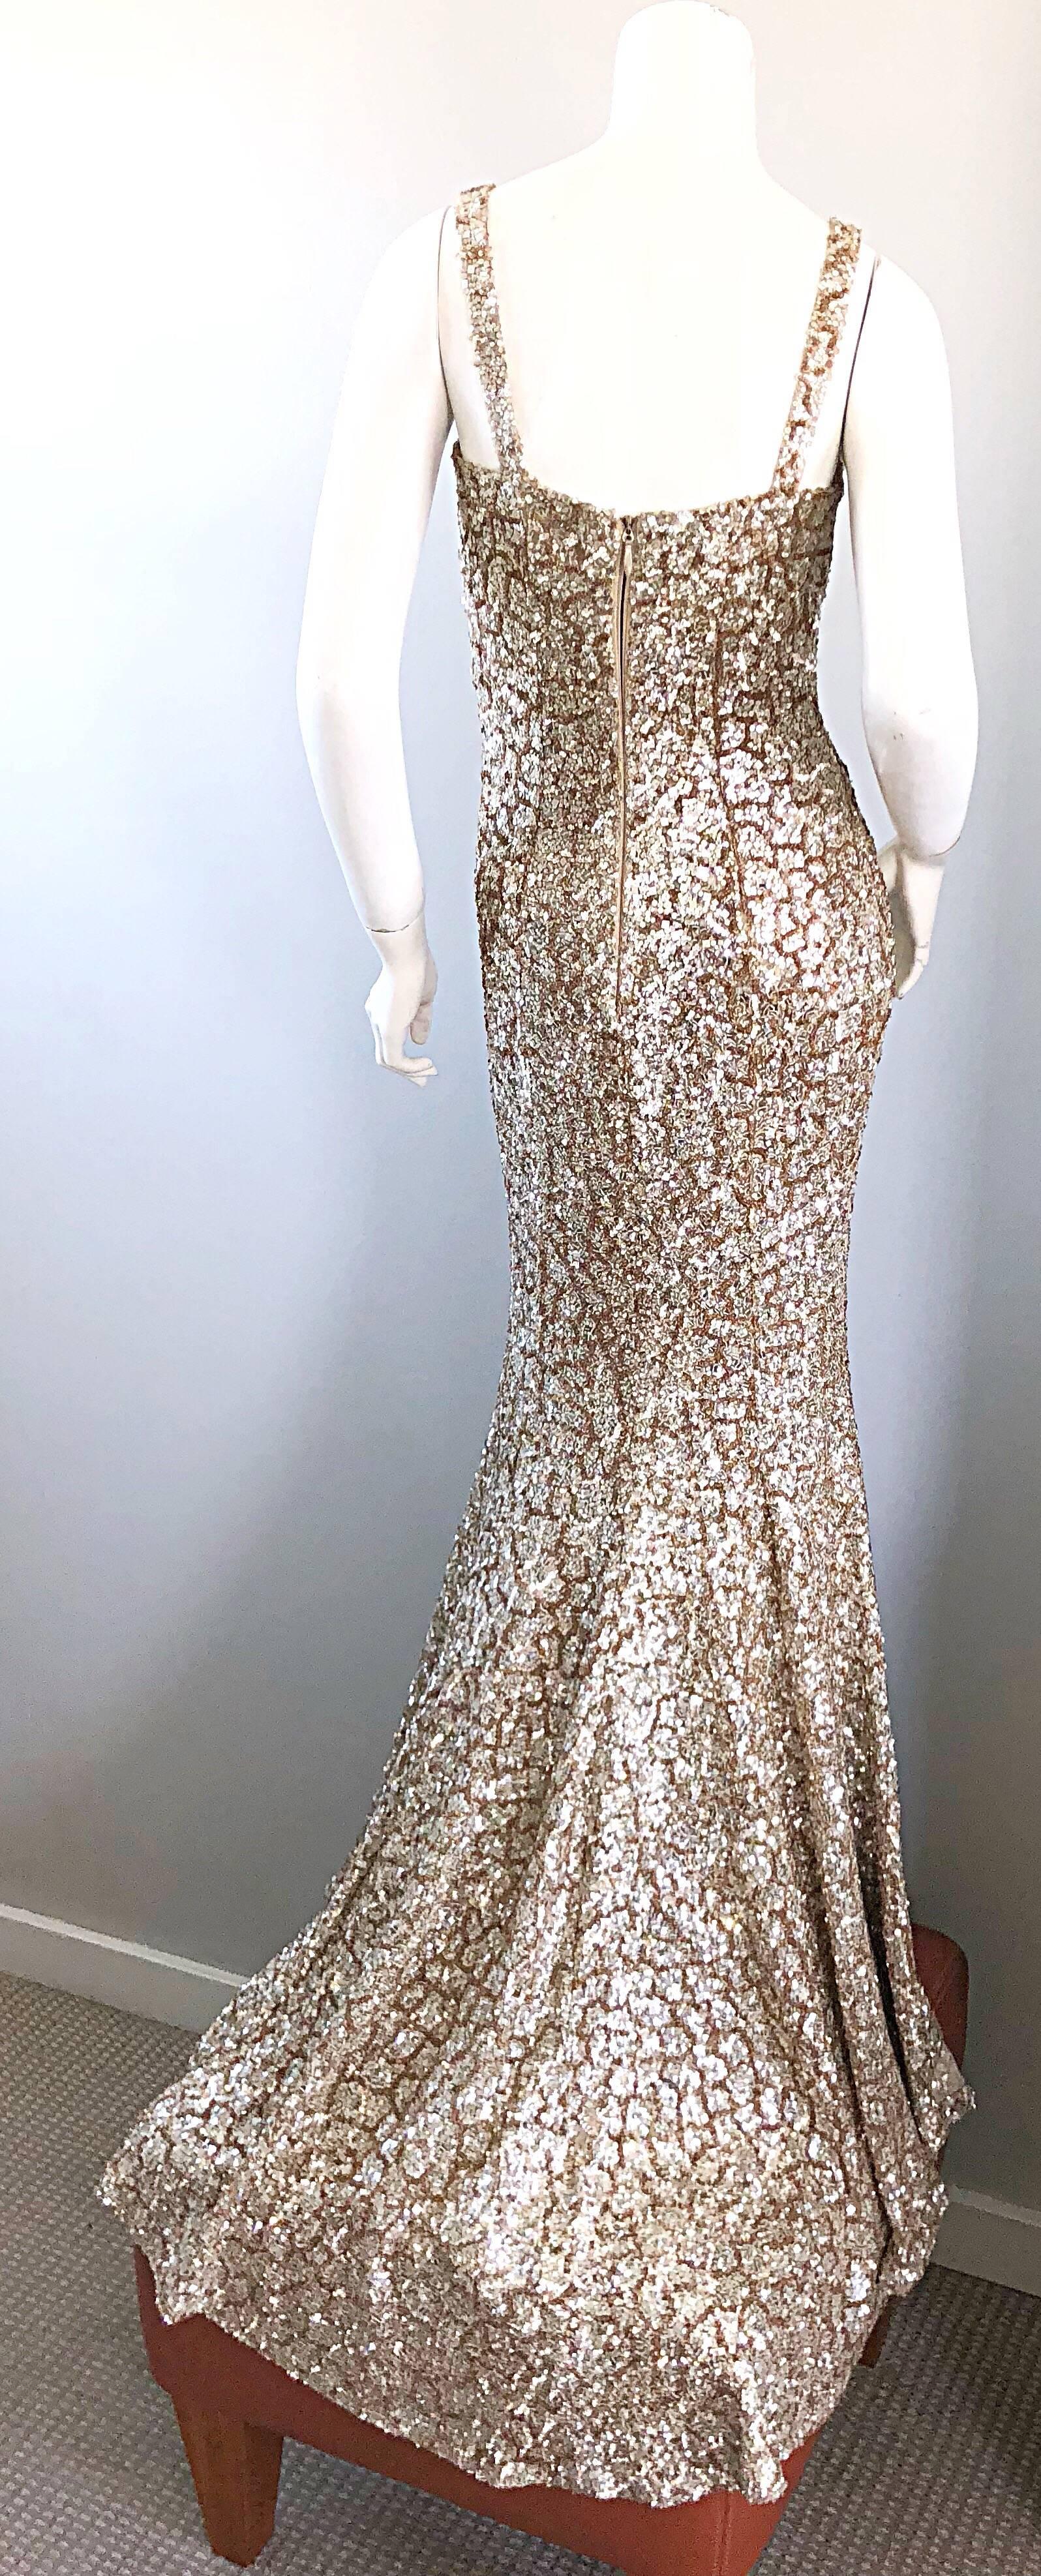 Monique Lhuillier Gorgeous Resort 2012 Gold Rose Gold Full Sequin Trained Gown  11